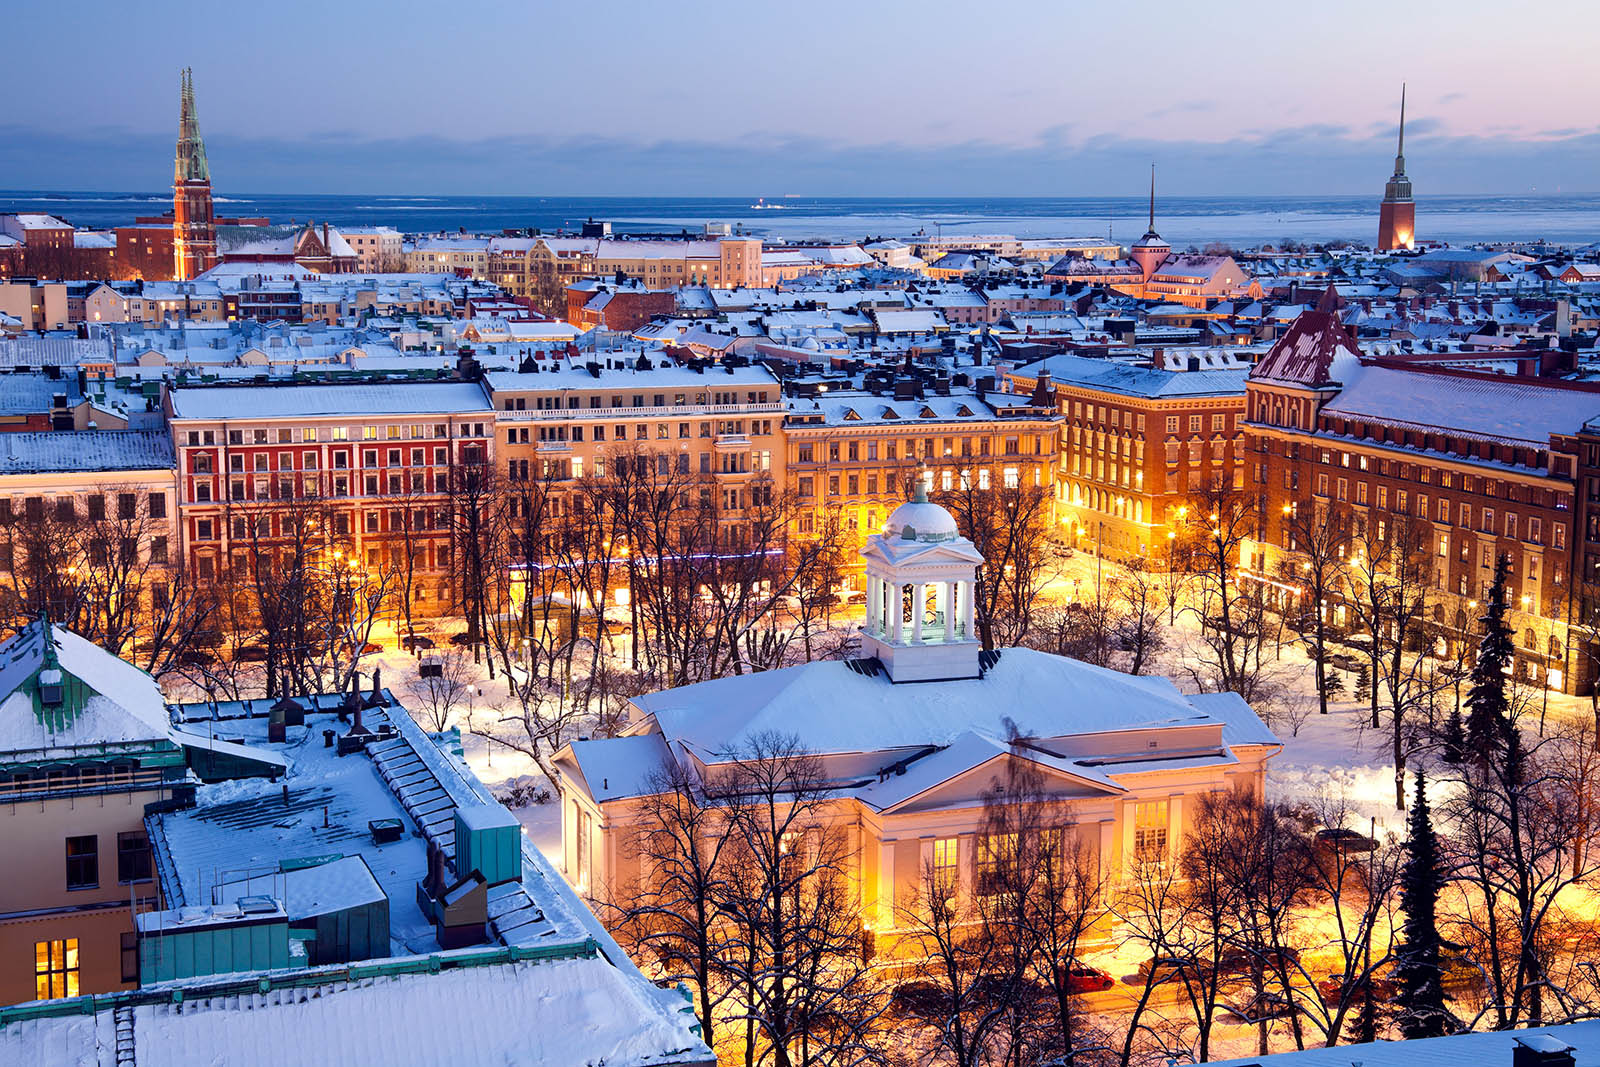 🗽 What Famous Landmark Should You Visit Next Based on Your A-Z Travel Bucket List? Finland